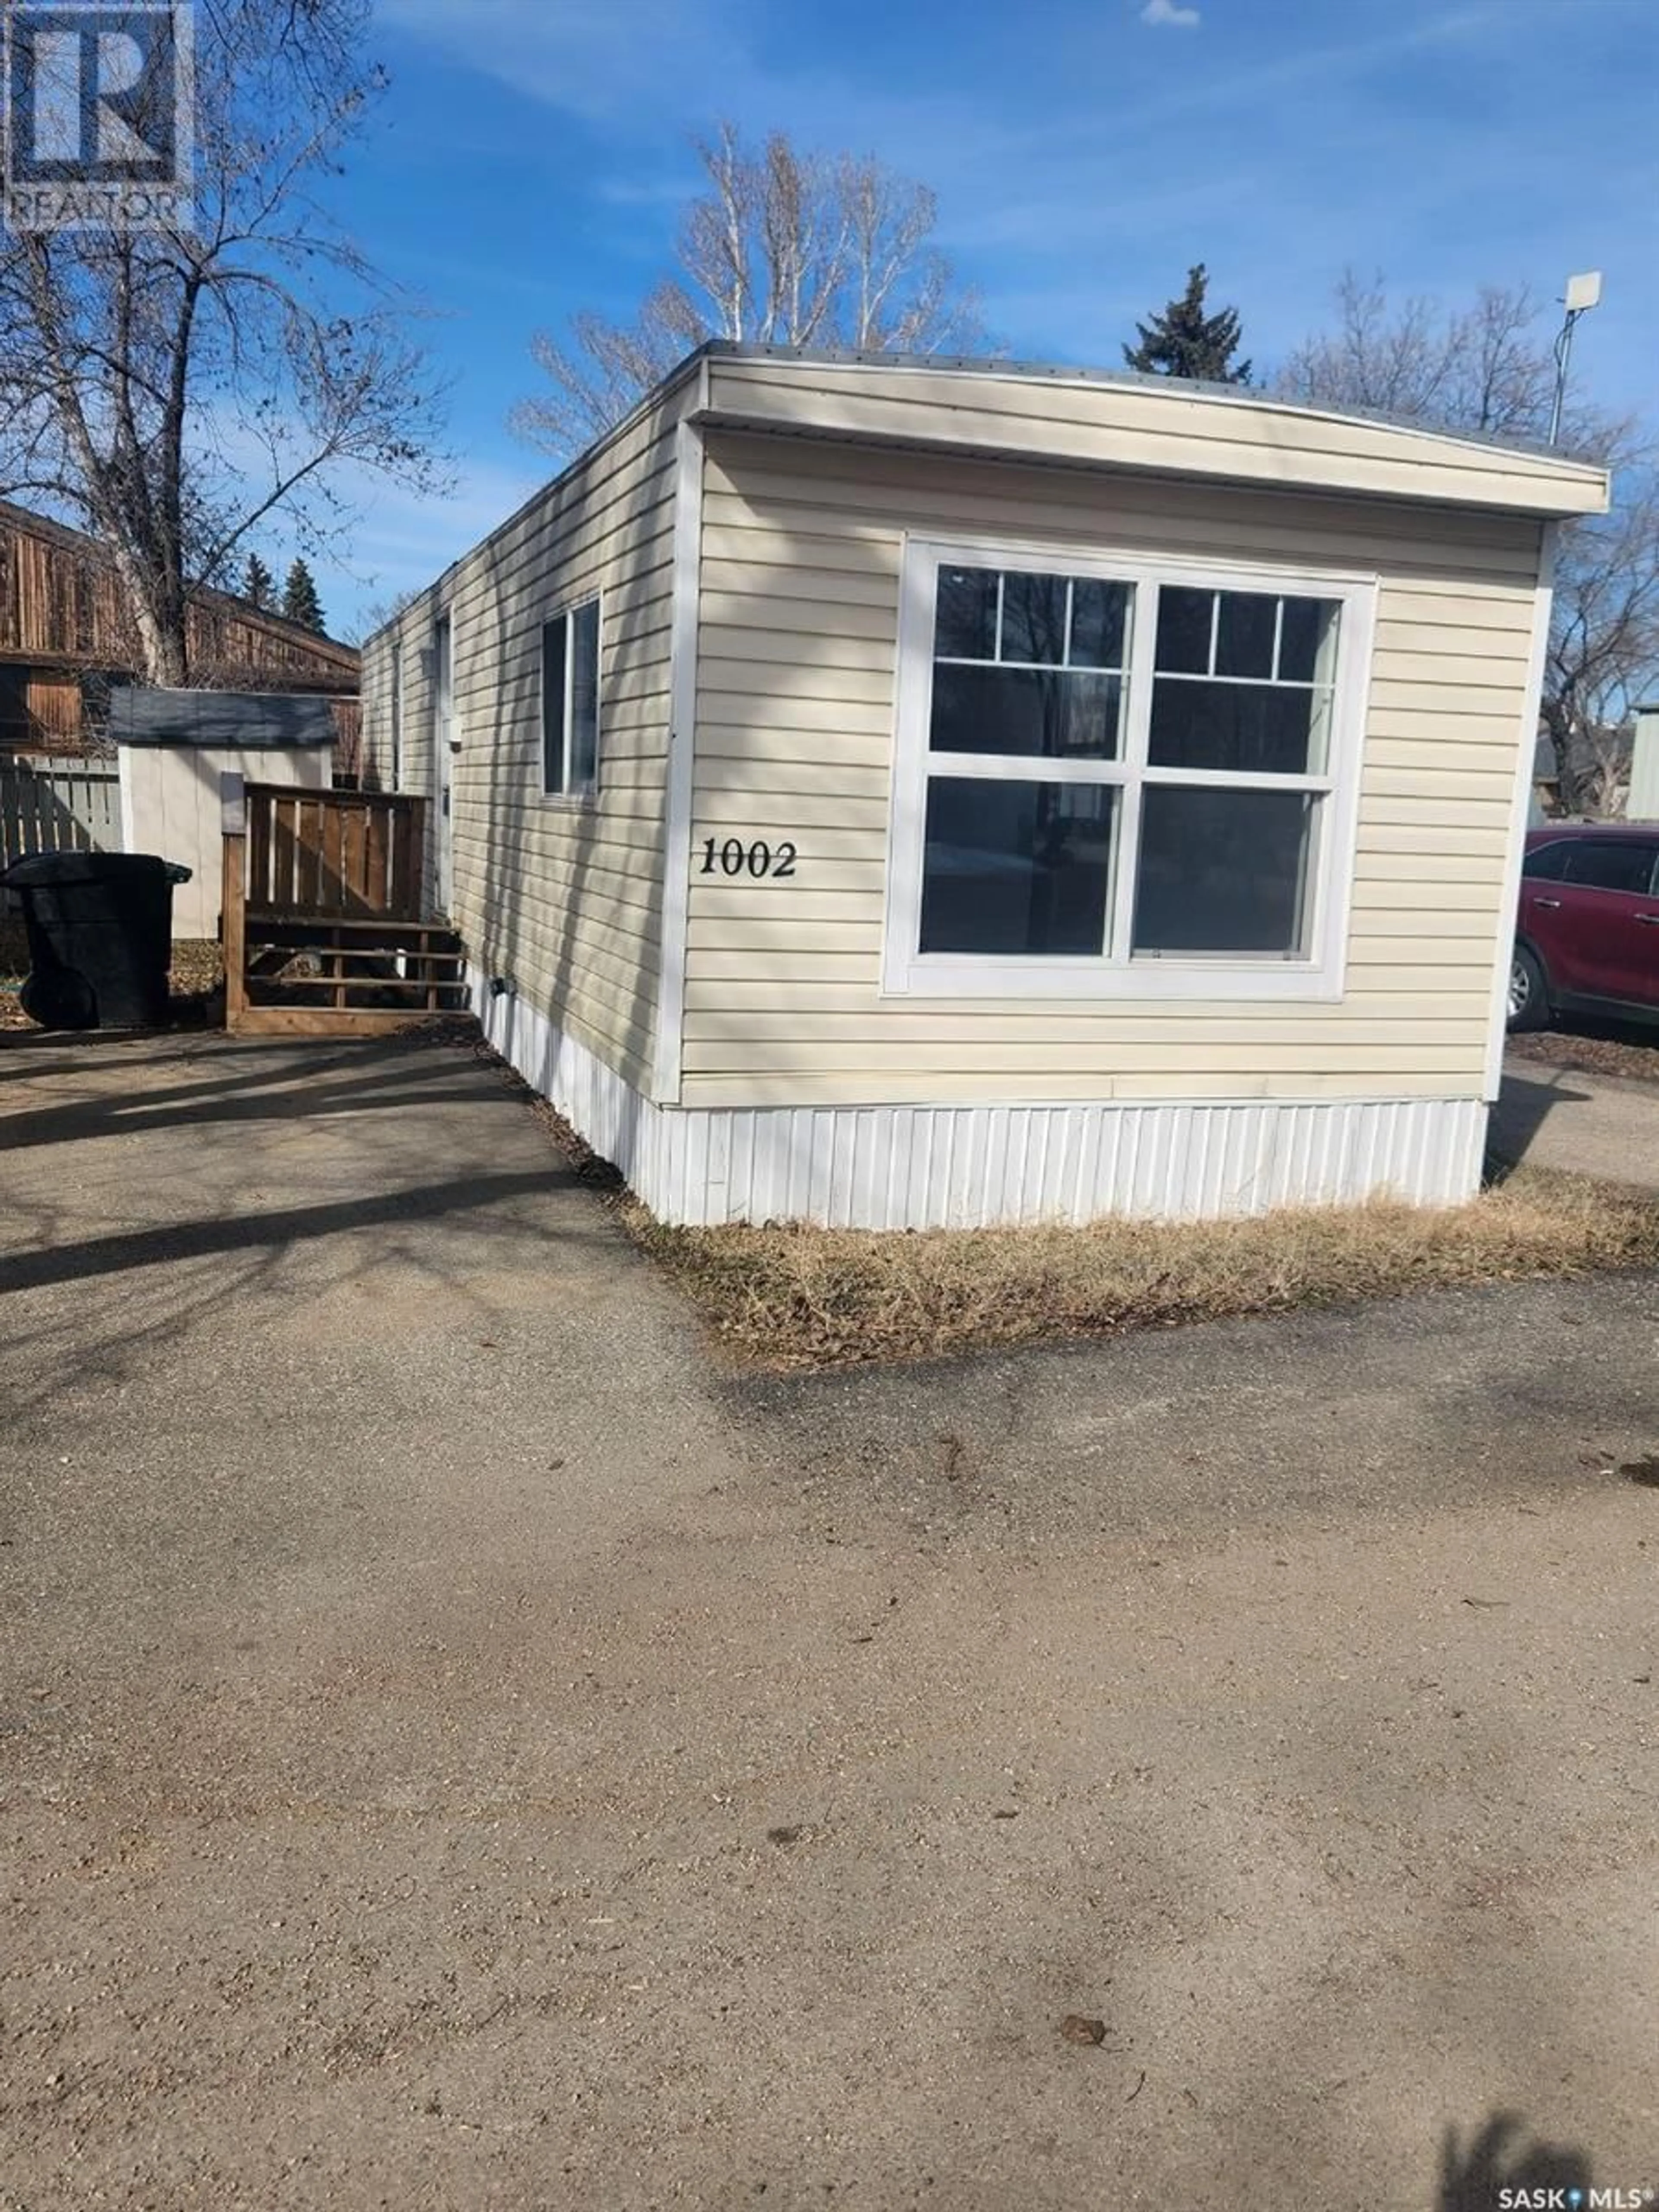 A pic from exterior of the house or condo for 1002 1524 Rayner AVENUE, Saskatoon Saskatchewan S7N1T1